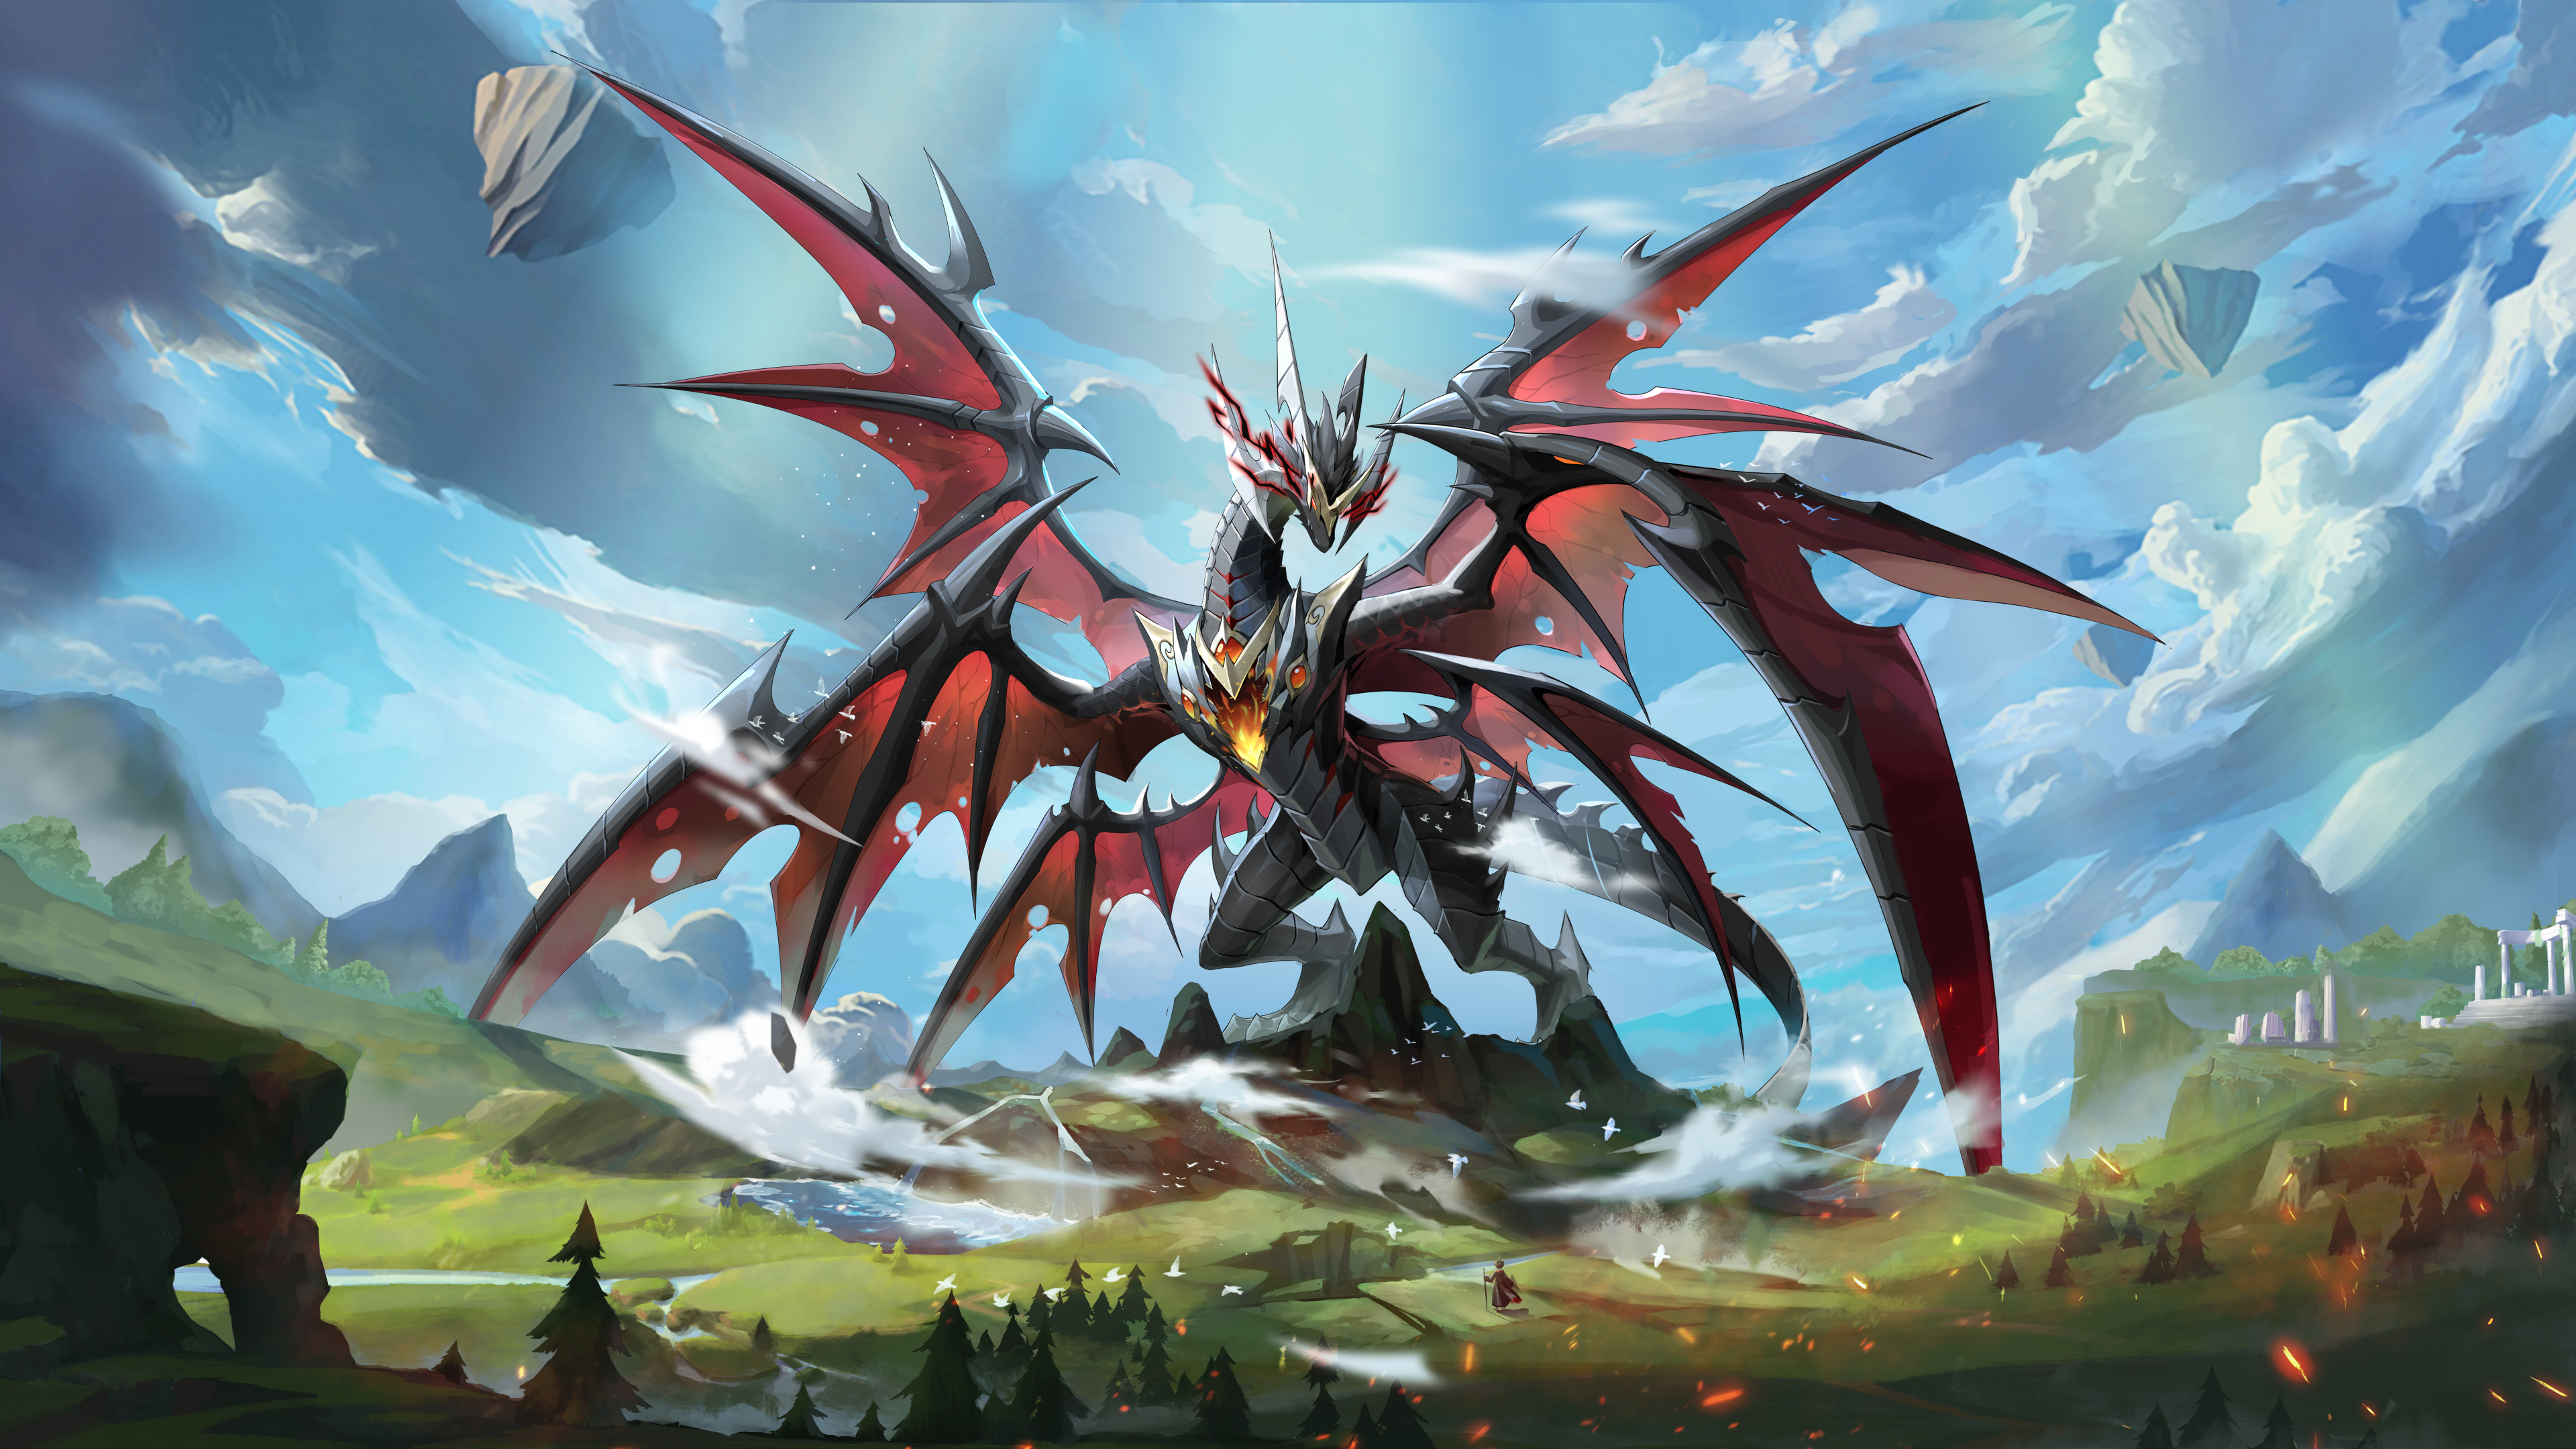 Anime Creatures Anime Games Artwork Dragon Wings Giant Clouds 3840x2160